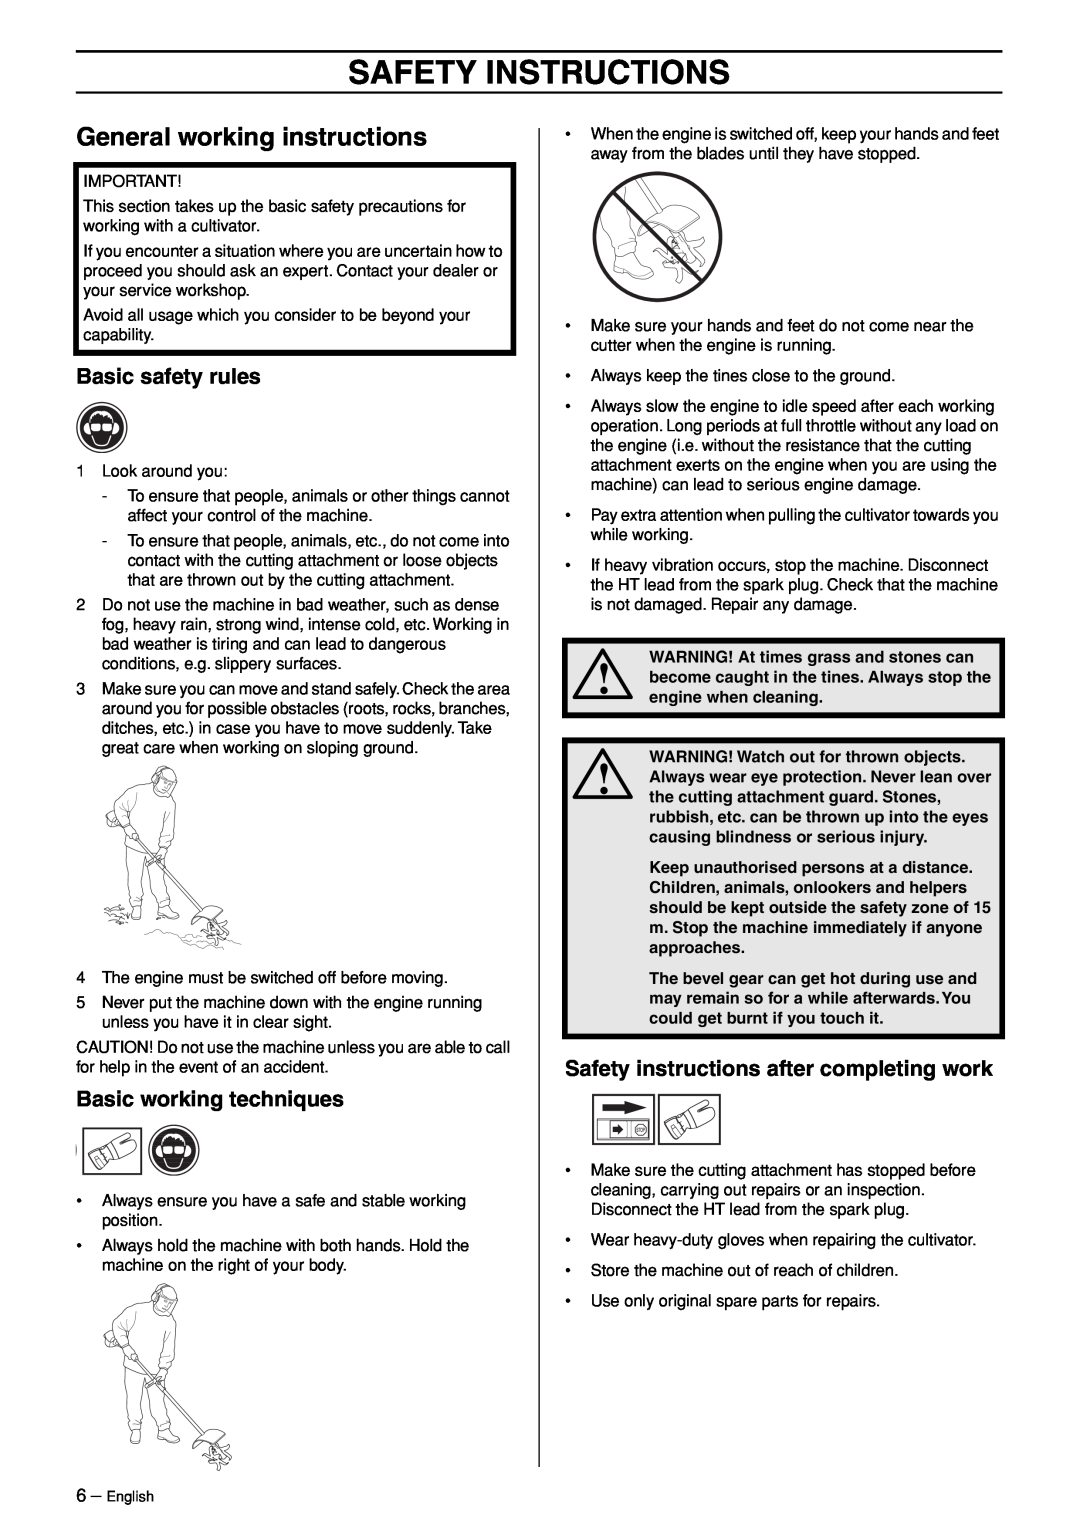 Husqvarna CA 150 General working instructions, Basic safety rules, Basic working techniques, Safety Instructions 